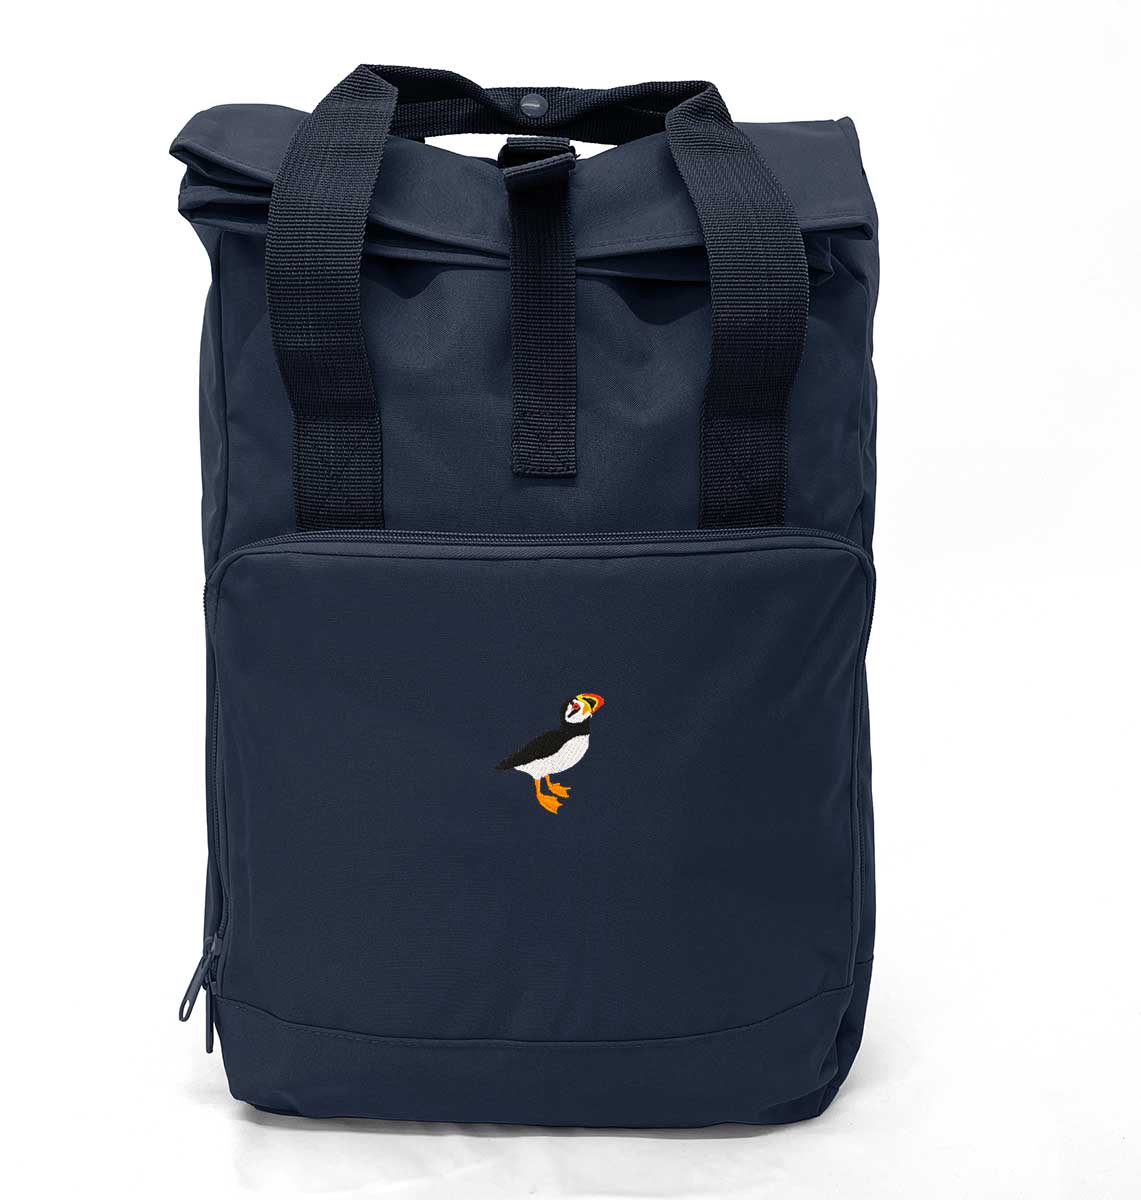 Puffin Large Roll-top Laptop Recycled Backpack - Blue Panda